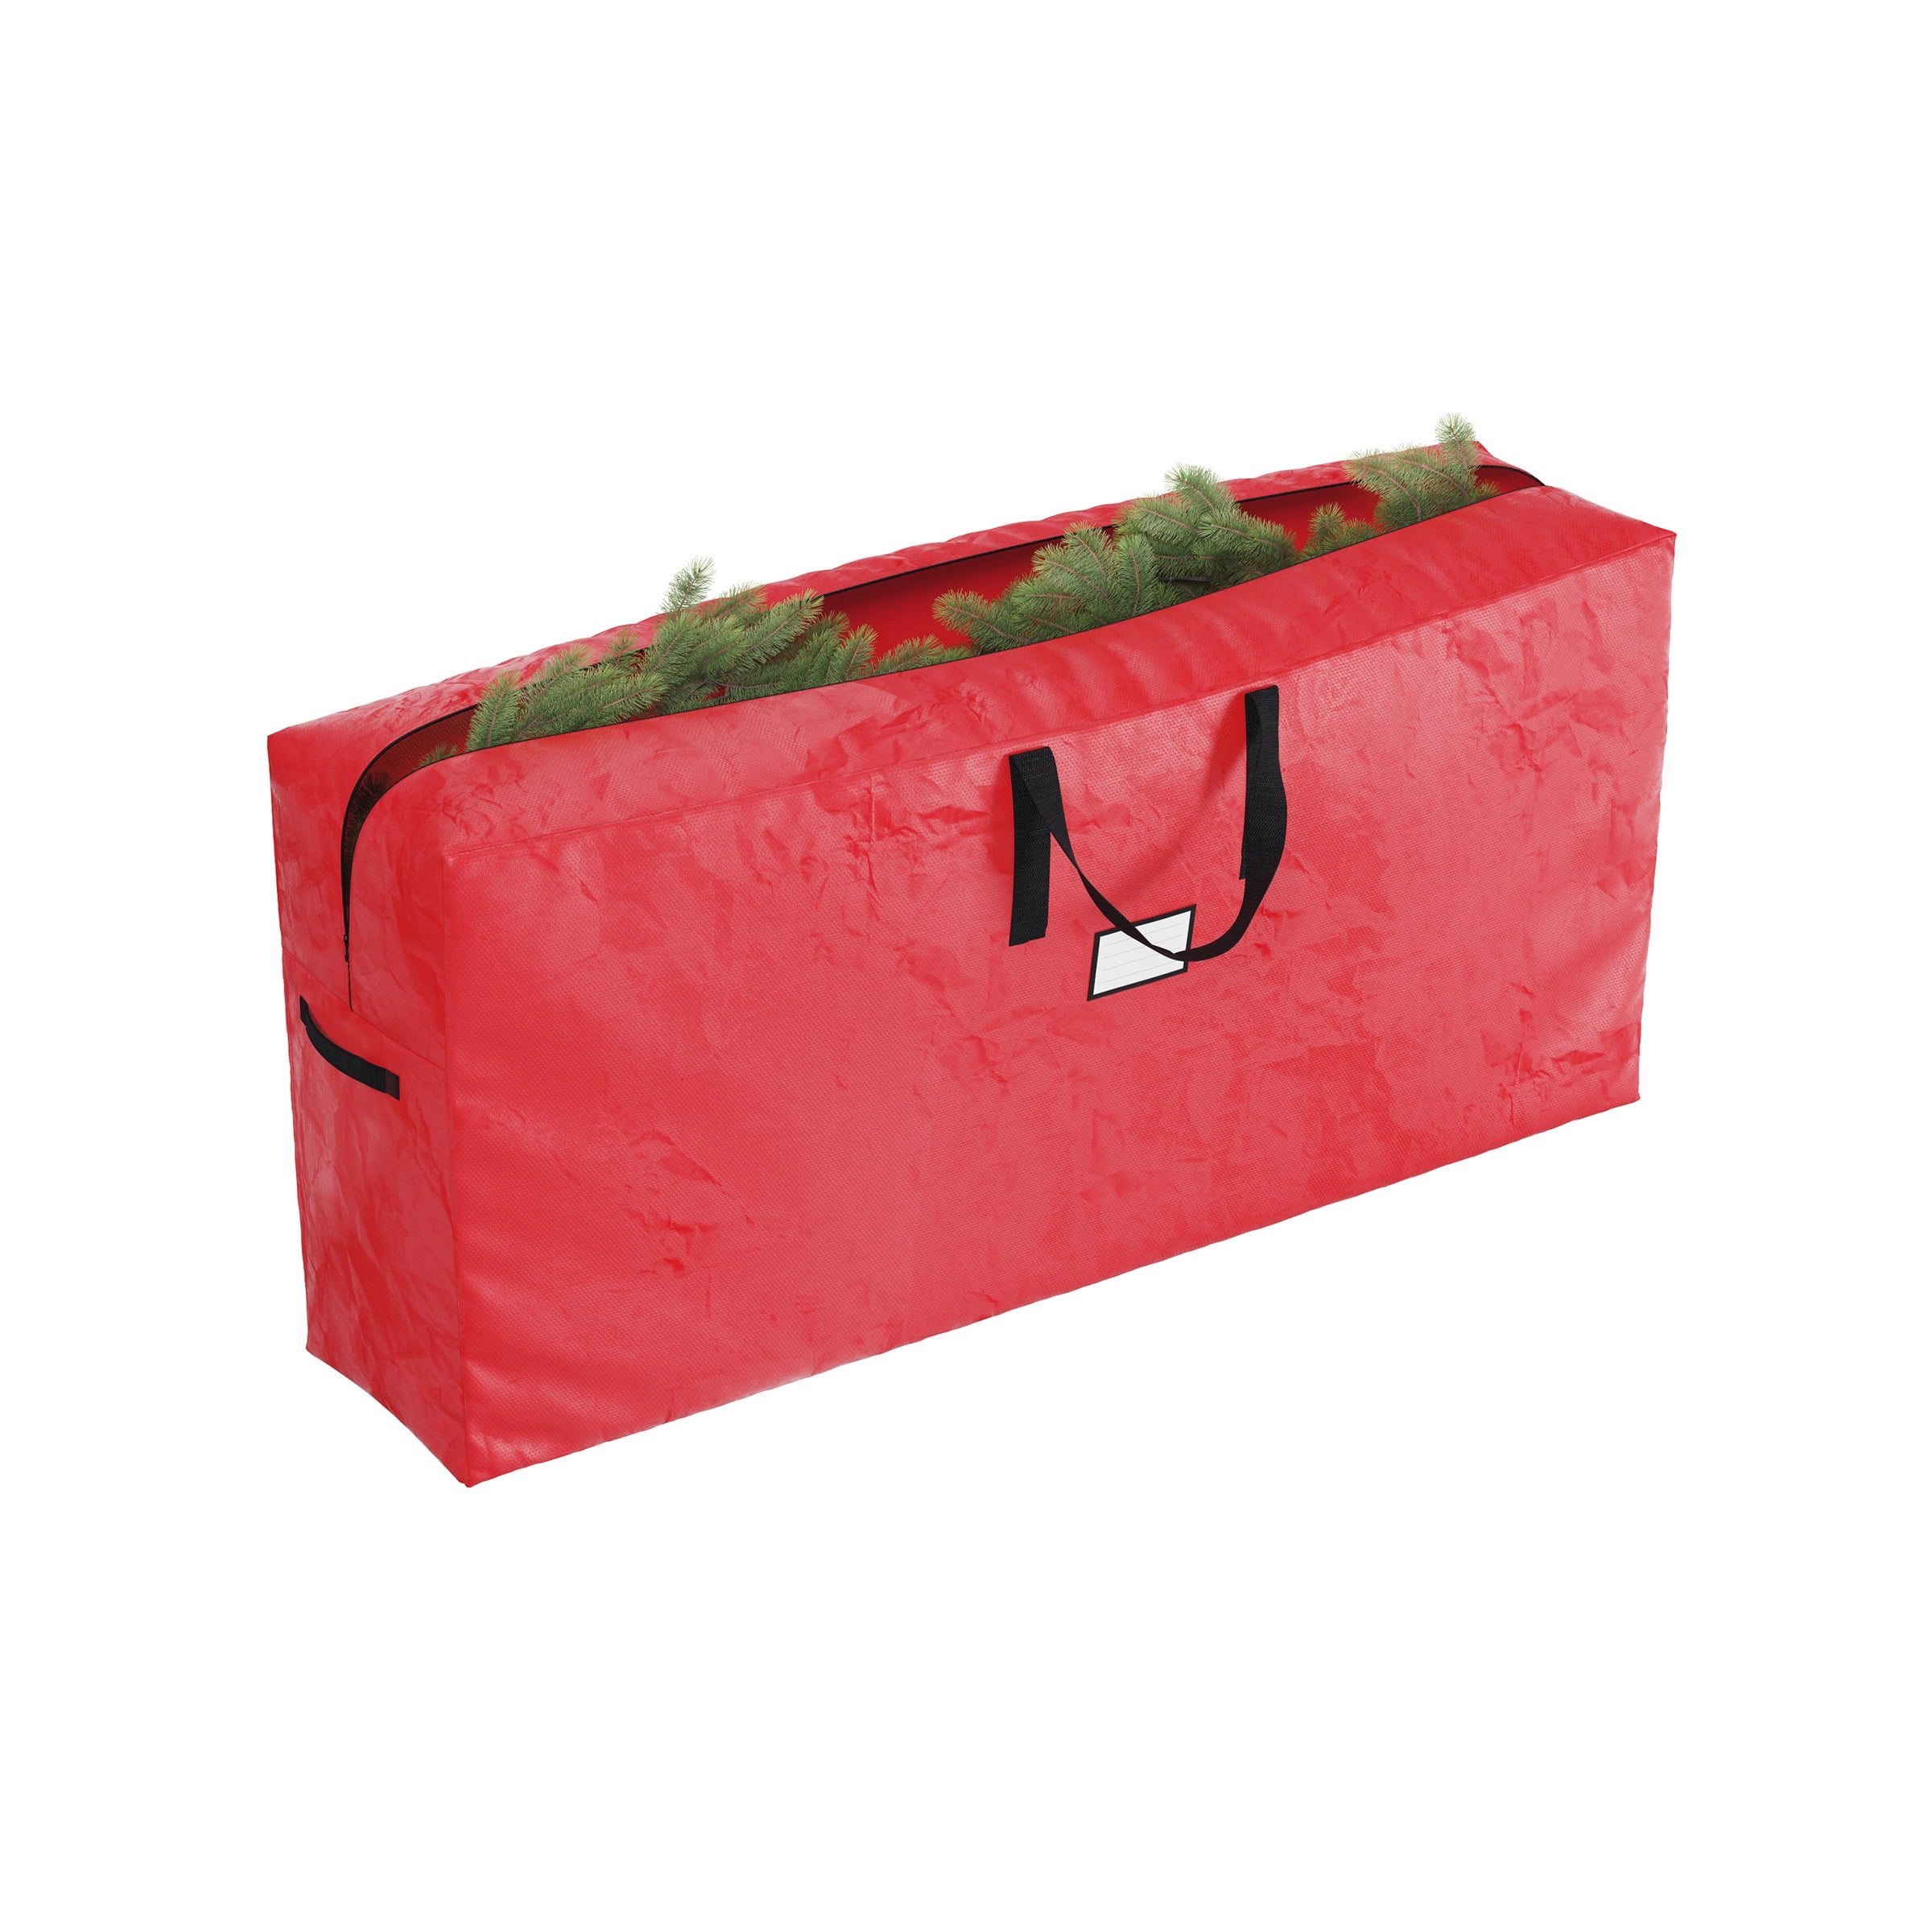 Strong & Durable High Grade Waterproof Storage Bag Ideal for Up to 9 Ft Tall Xmas Trees and other Christmas Decorations SHareconn Christmas Tree Storage Bag 9 Ft Red